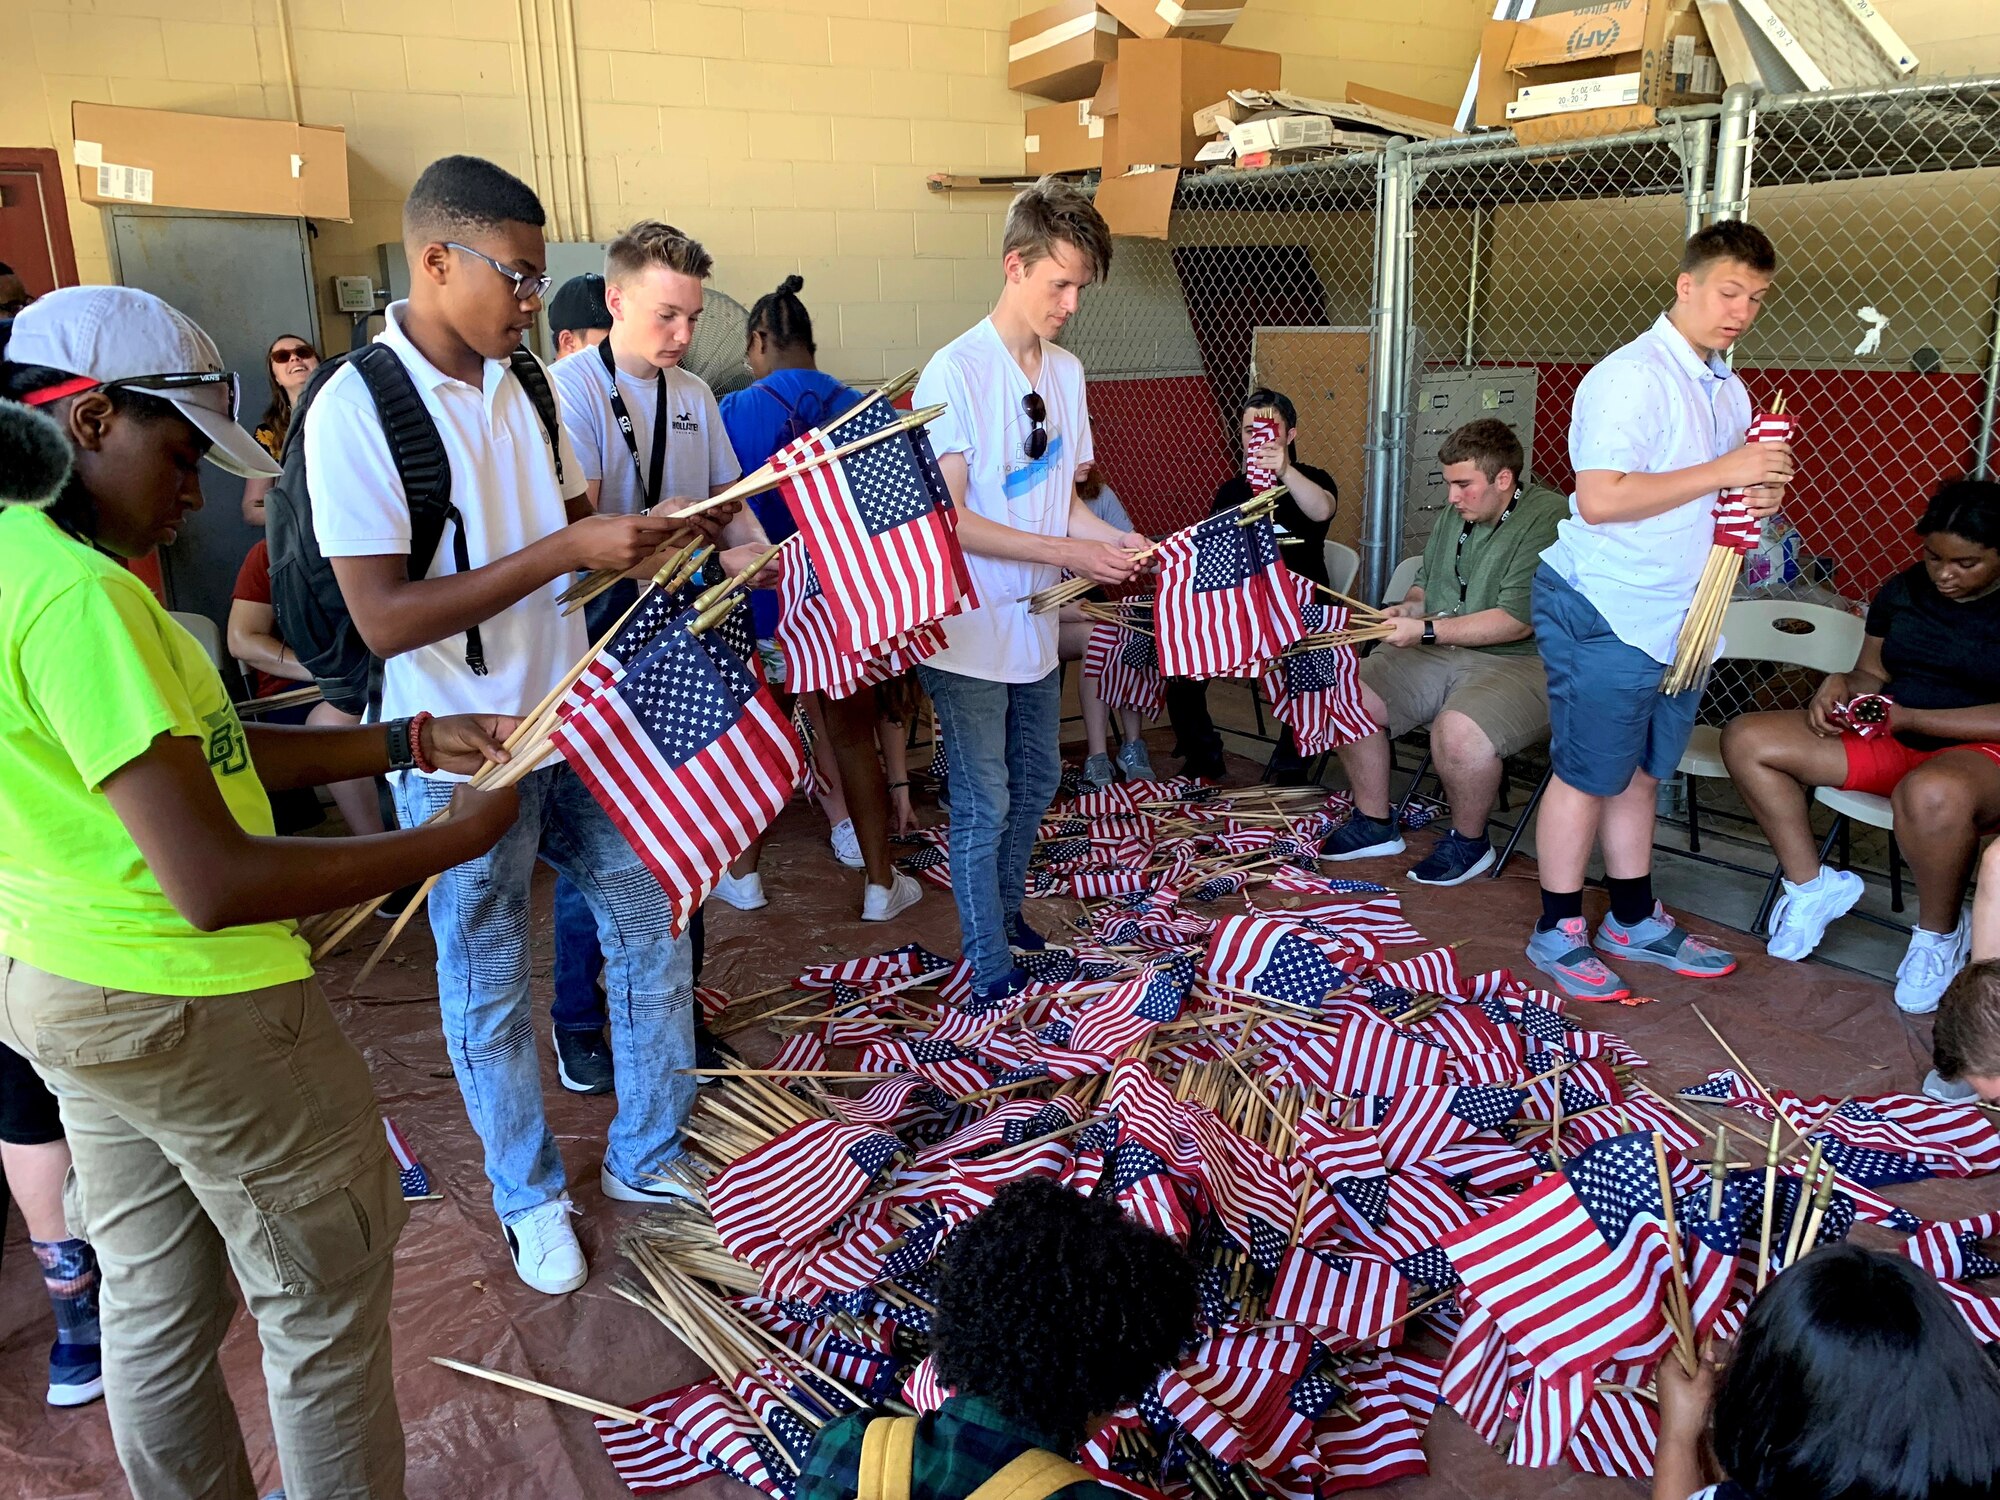 Attendees of the 2019 Youth of the Year Summit gather, roll and store American flags at the Fort Sam Houston Cemetery June 19. During their week in Texas, about 60 teens from across the Air Force took part in a variety of activities focused on teambuilding, leadership, community service and personal growth. The Air Force, through the Air Force Services Center, partners with the Boys and Girls Clubs of America to offer the Youth of the Year program.